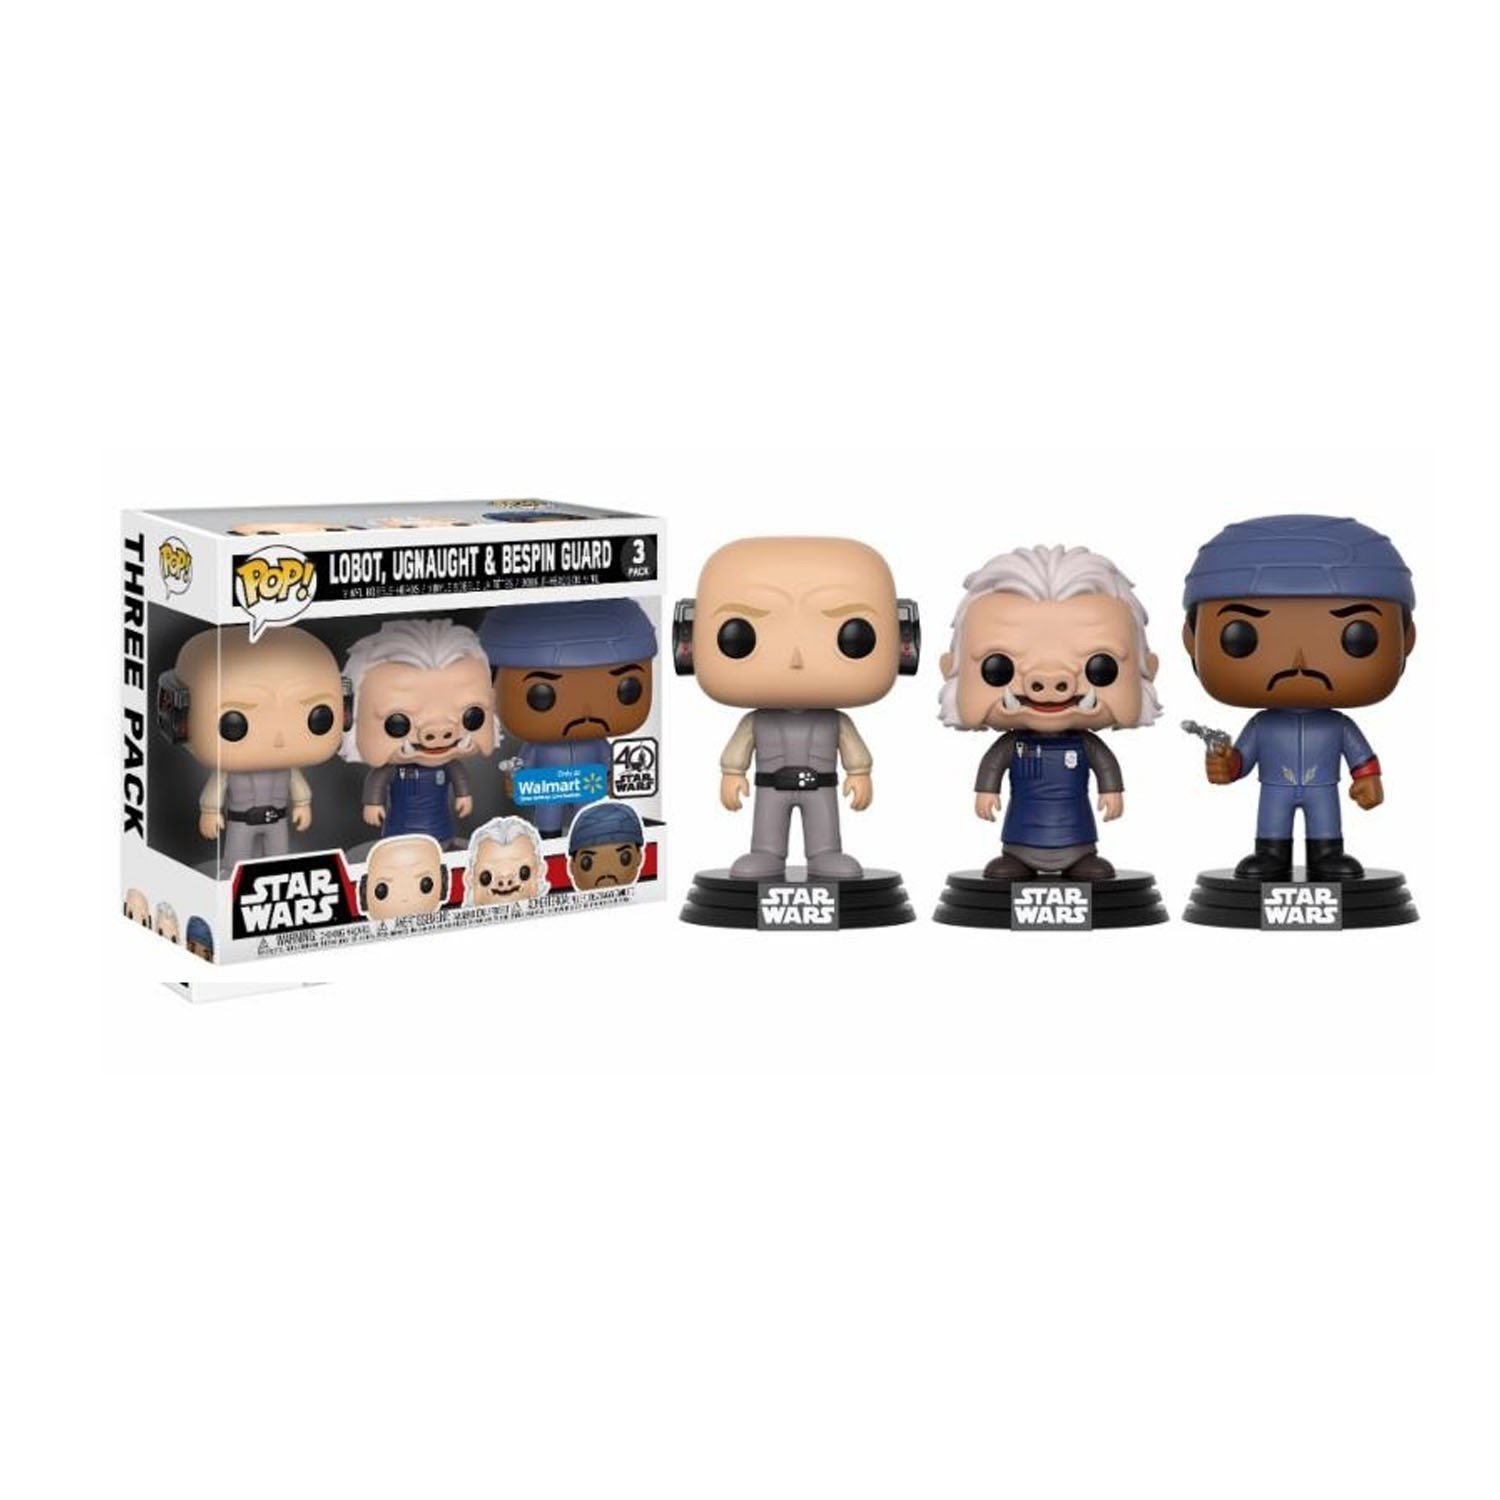 Funko Movies: POP! Star Wars - Cloud City 3 Pack, Lobot, Ugnaught, Bespin Guard - Walmart Exclusive - image 3 of 5